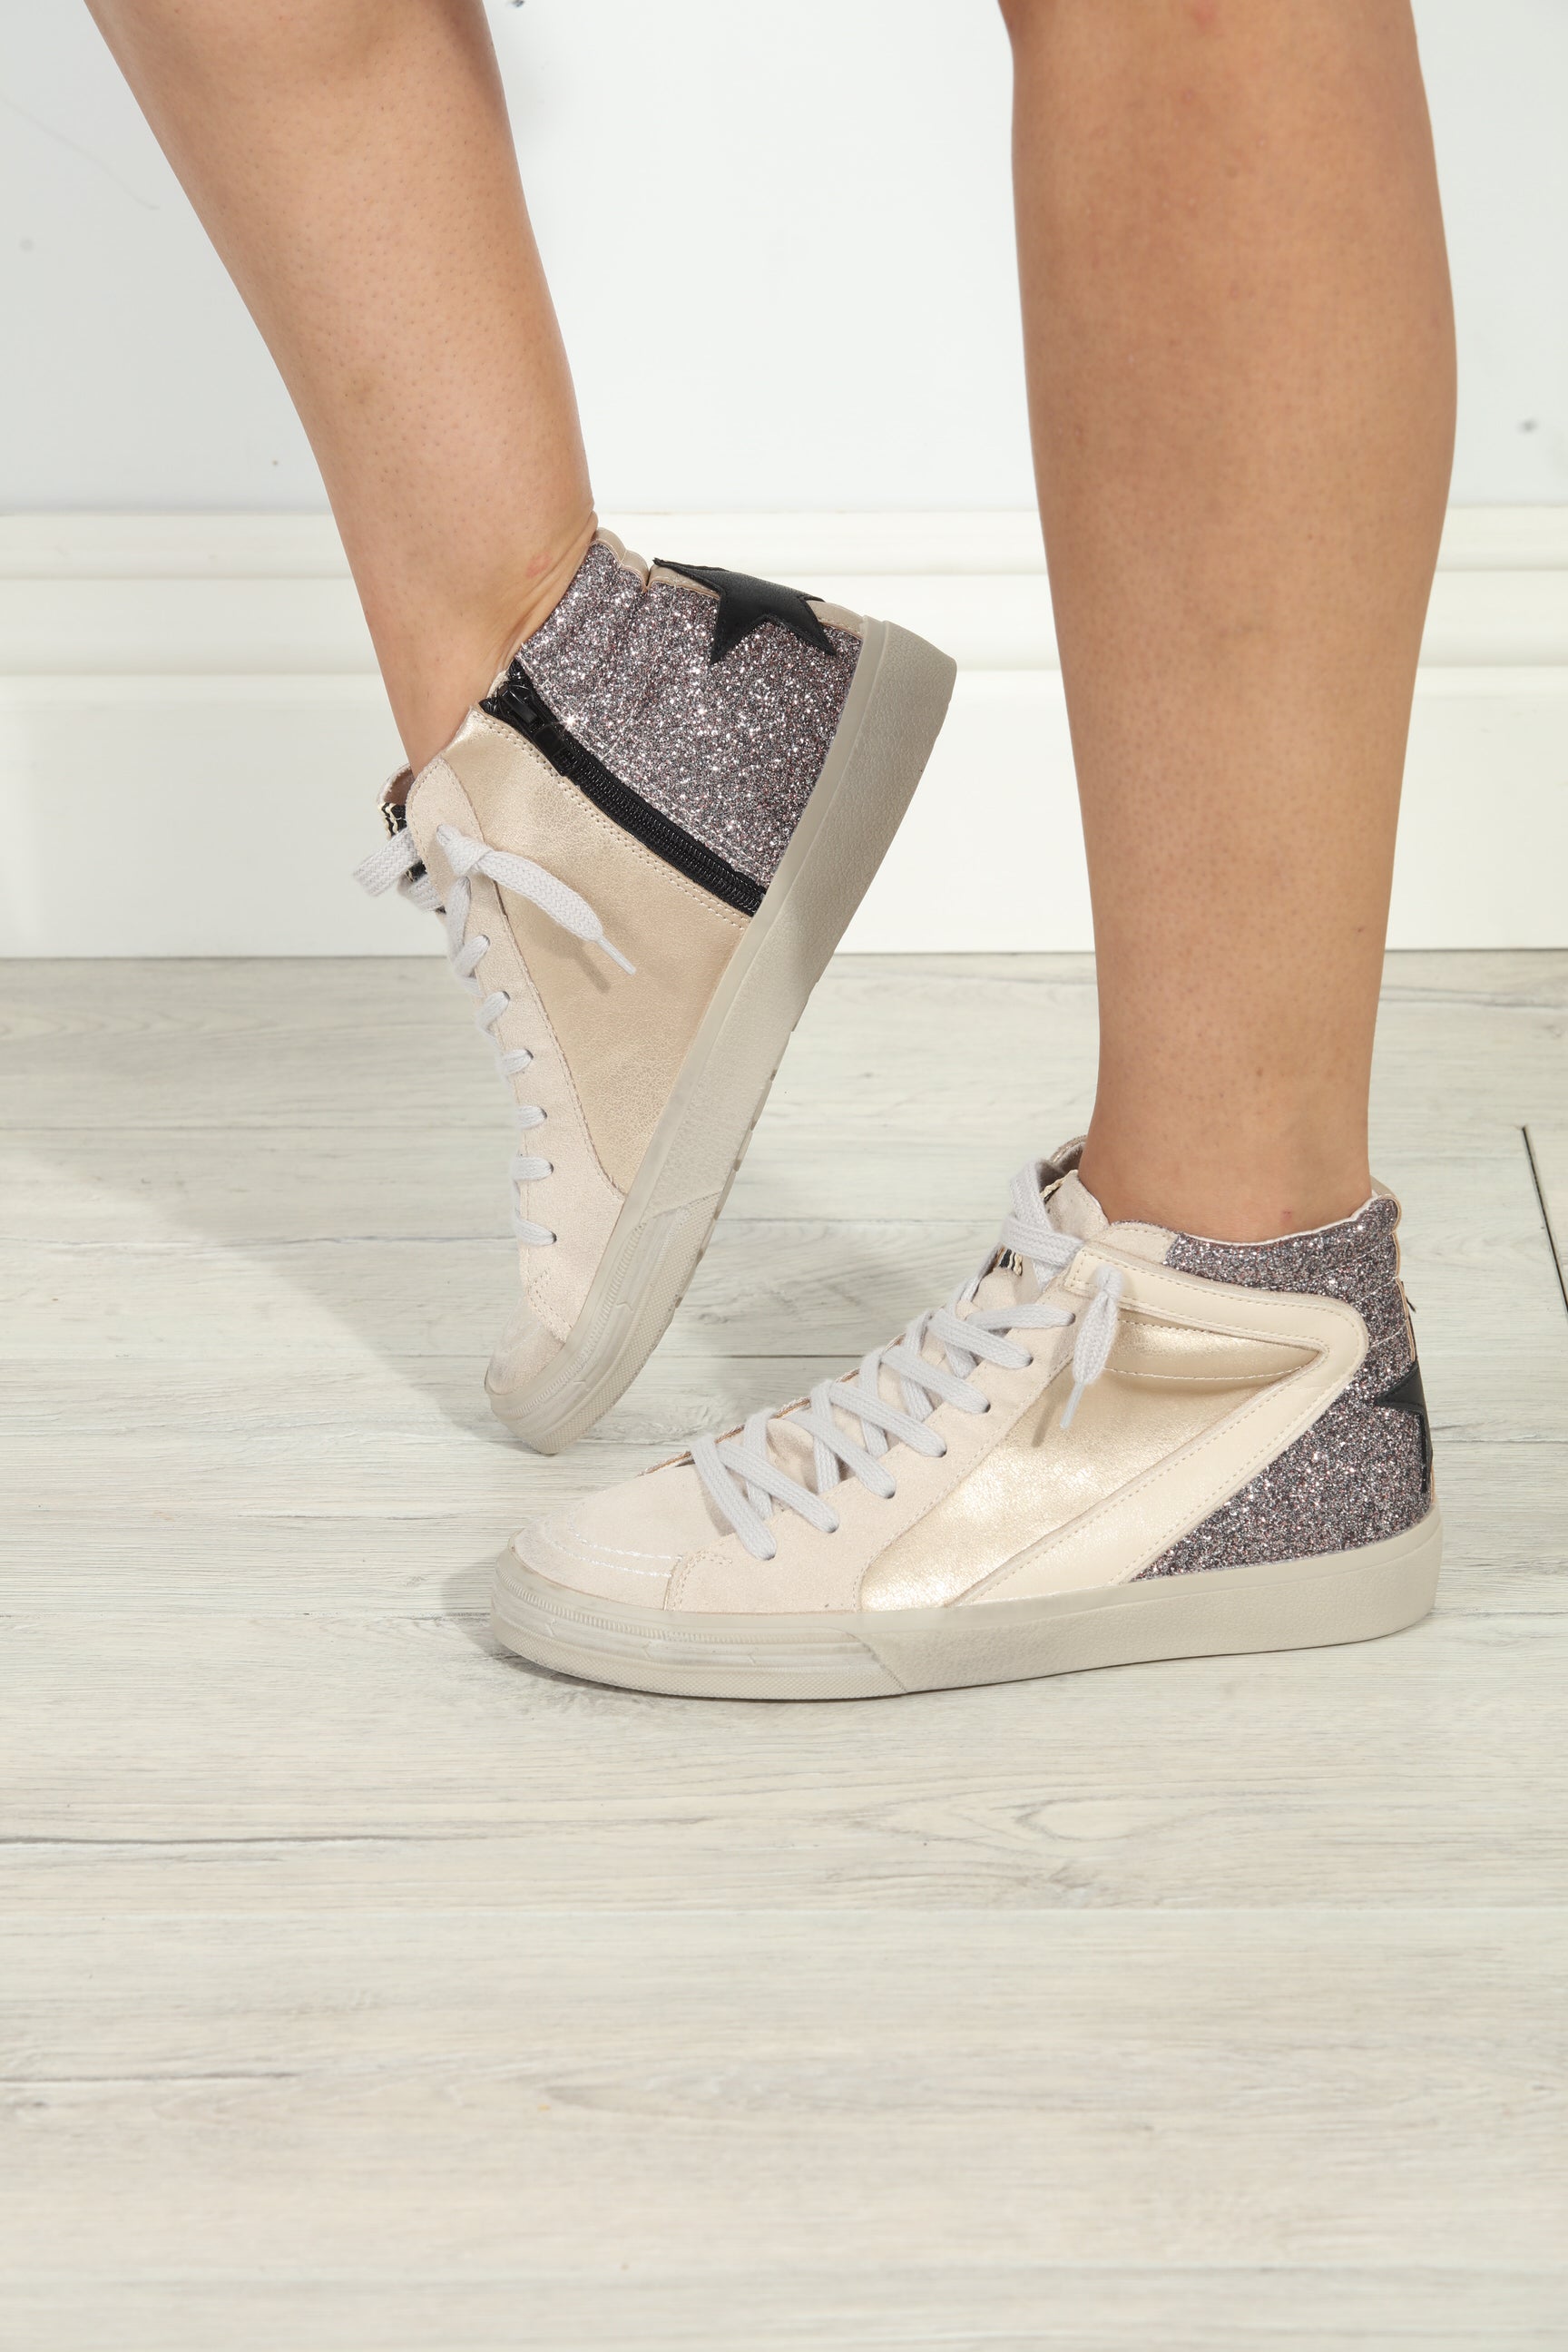 Rooney Pewter Glitter High-Top Sneakers